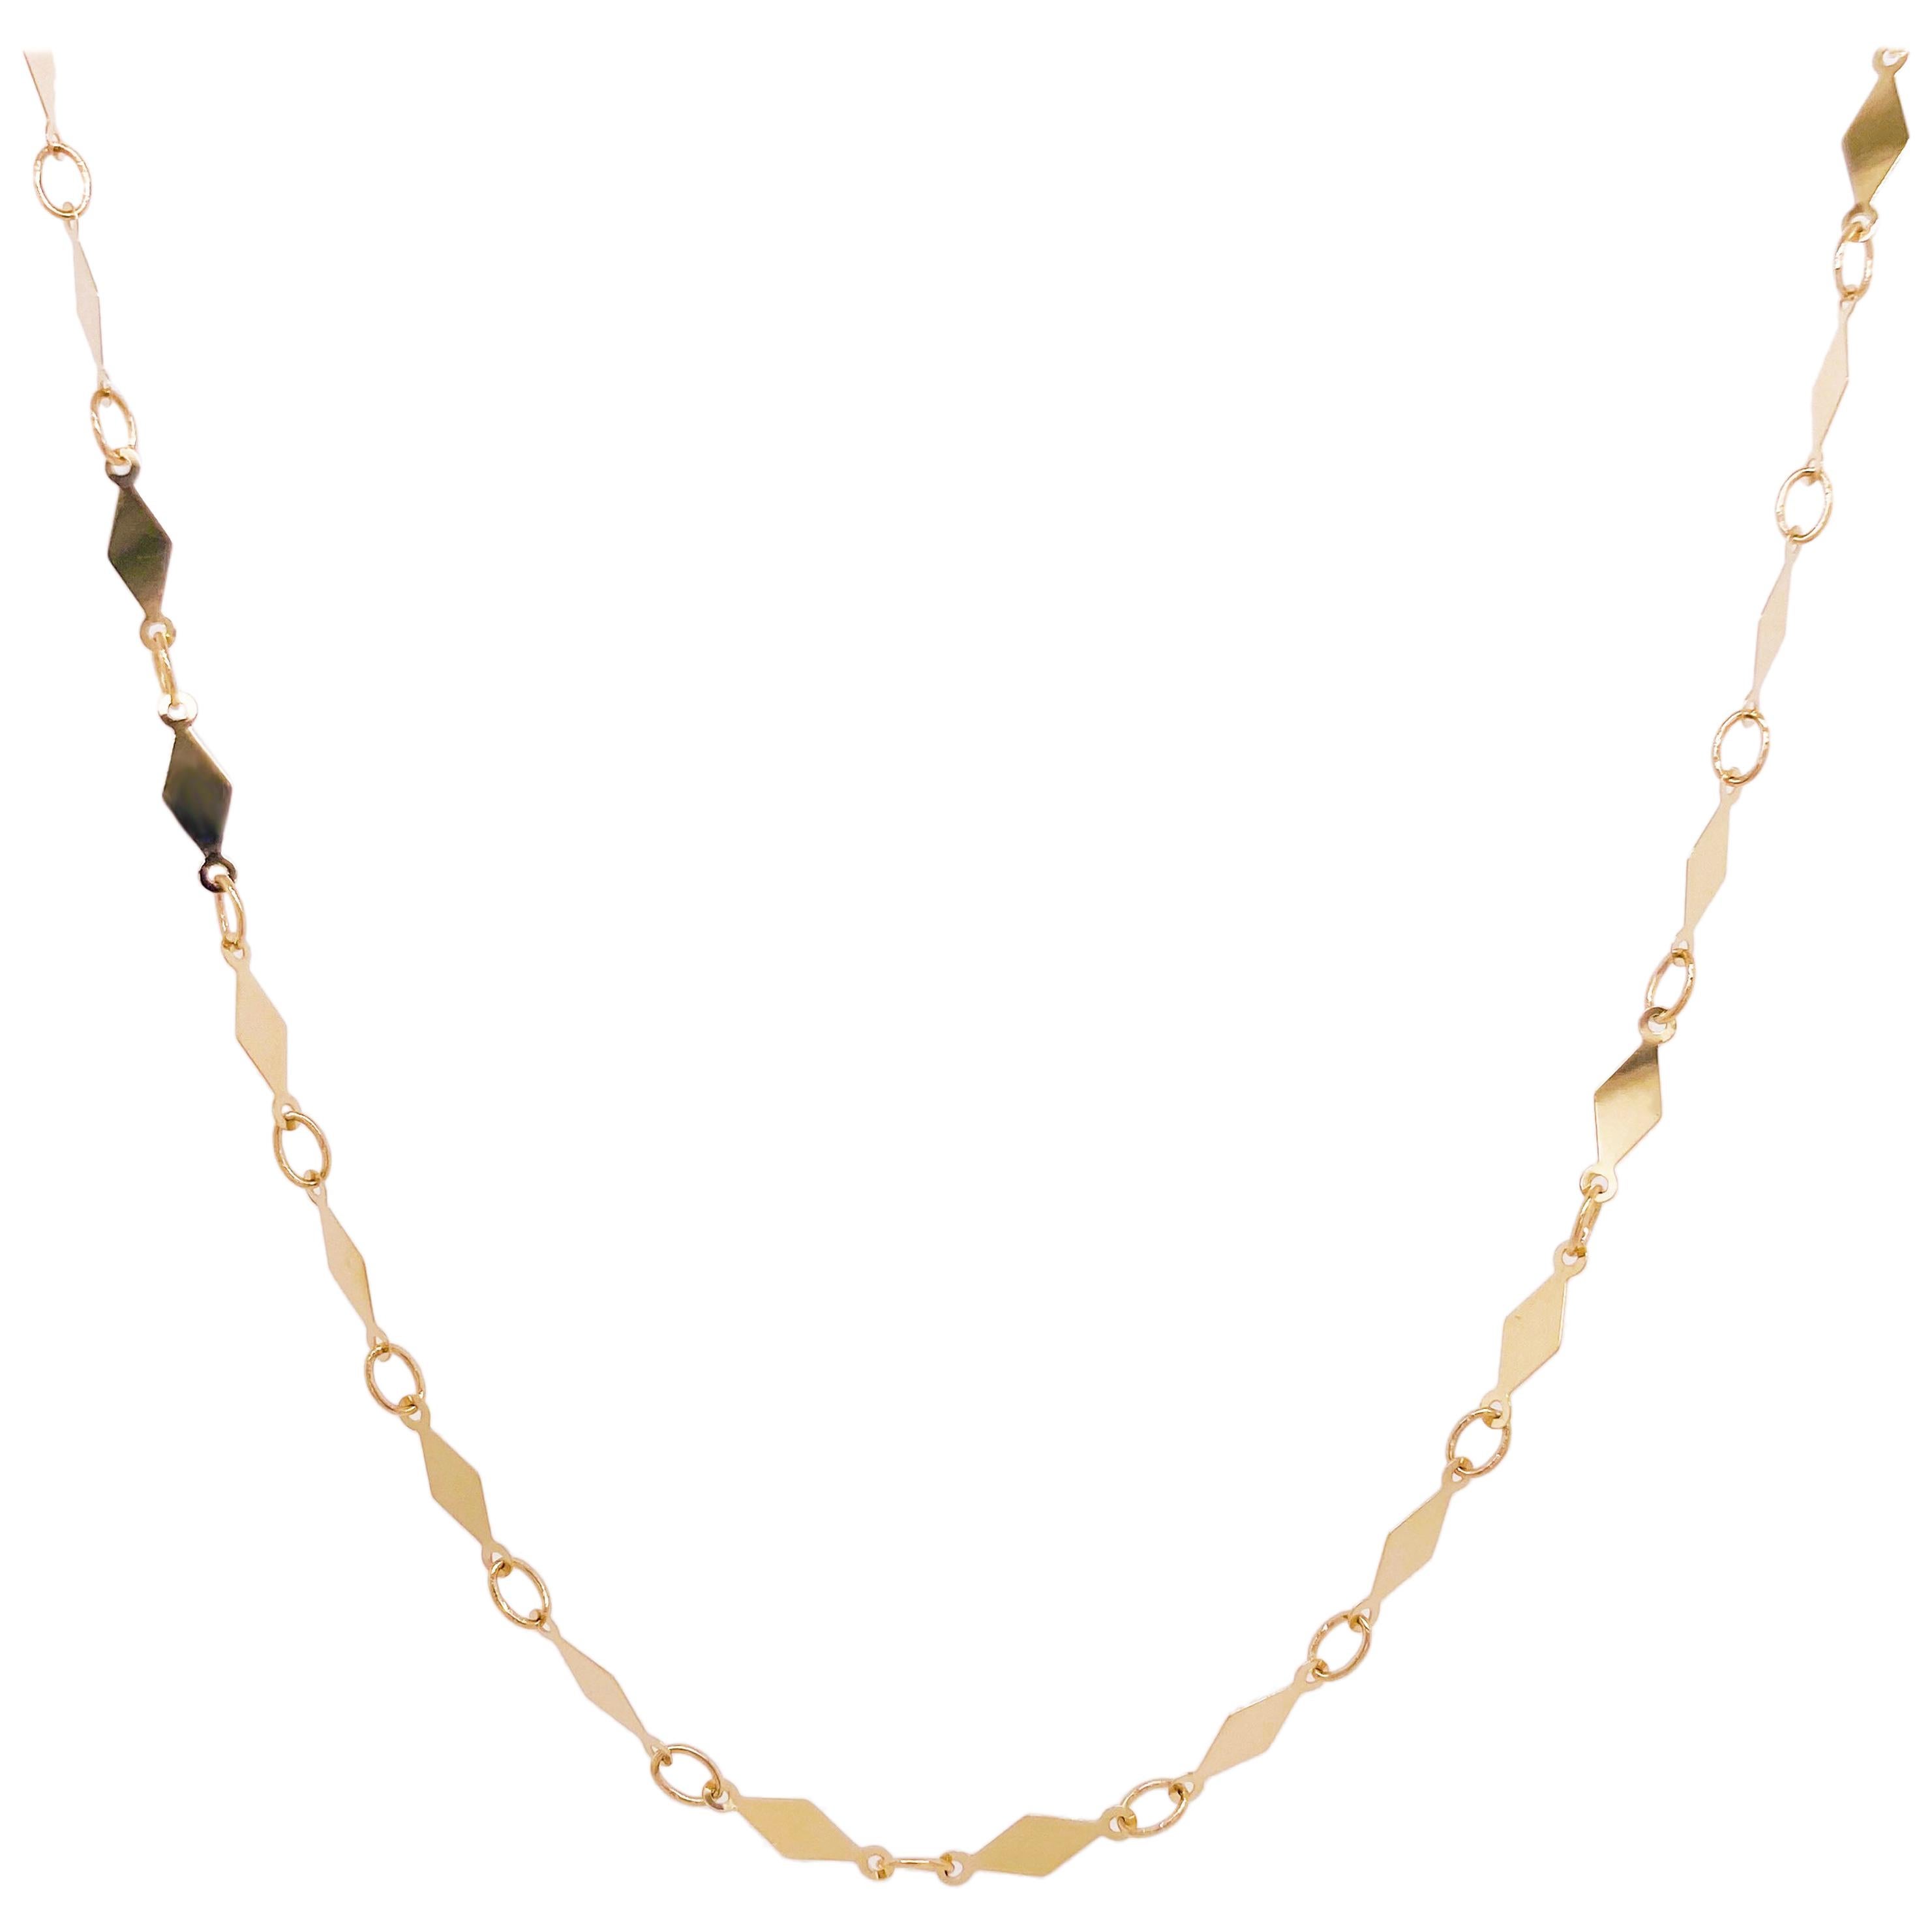 Gold Mirror Necklace, Sparkly 14 Karat Yellow Gold, Diamond Shape For Sale